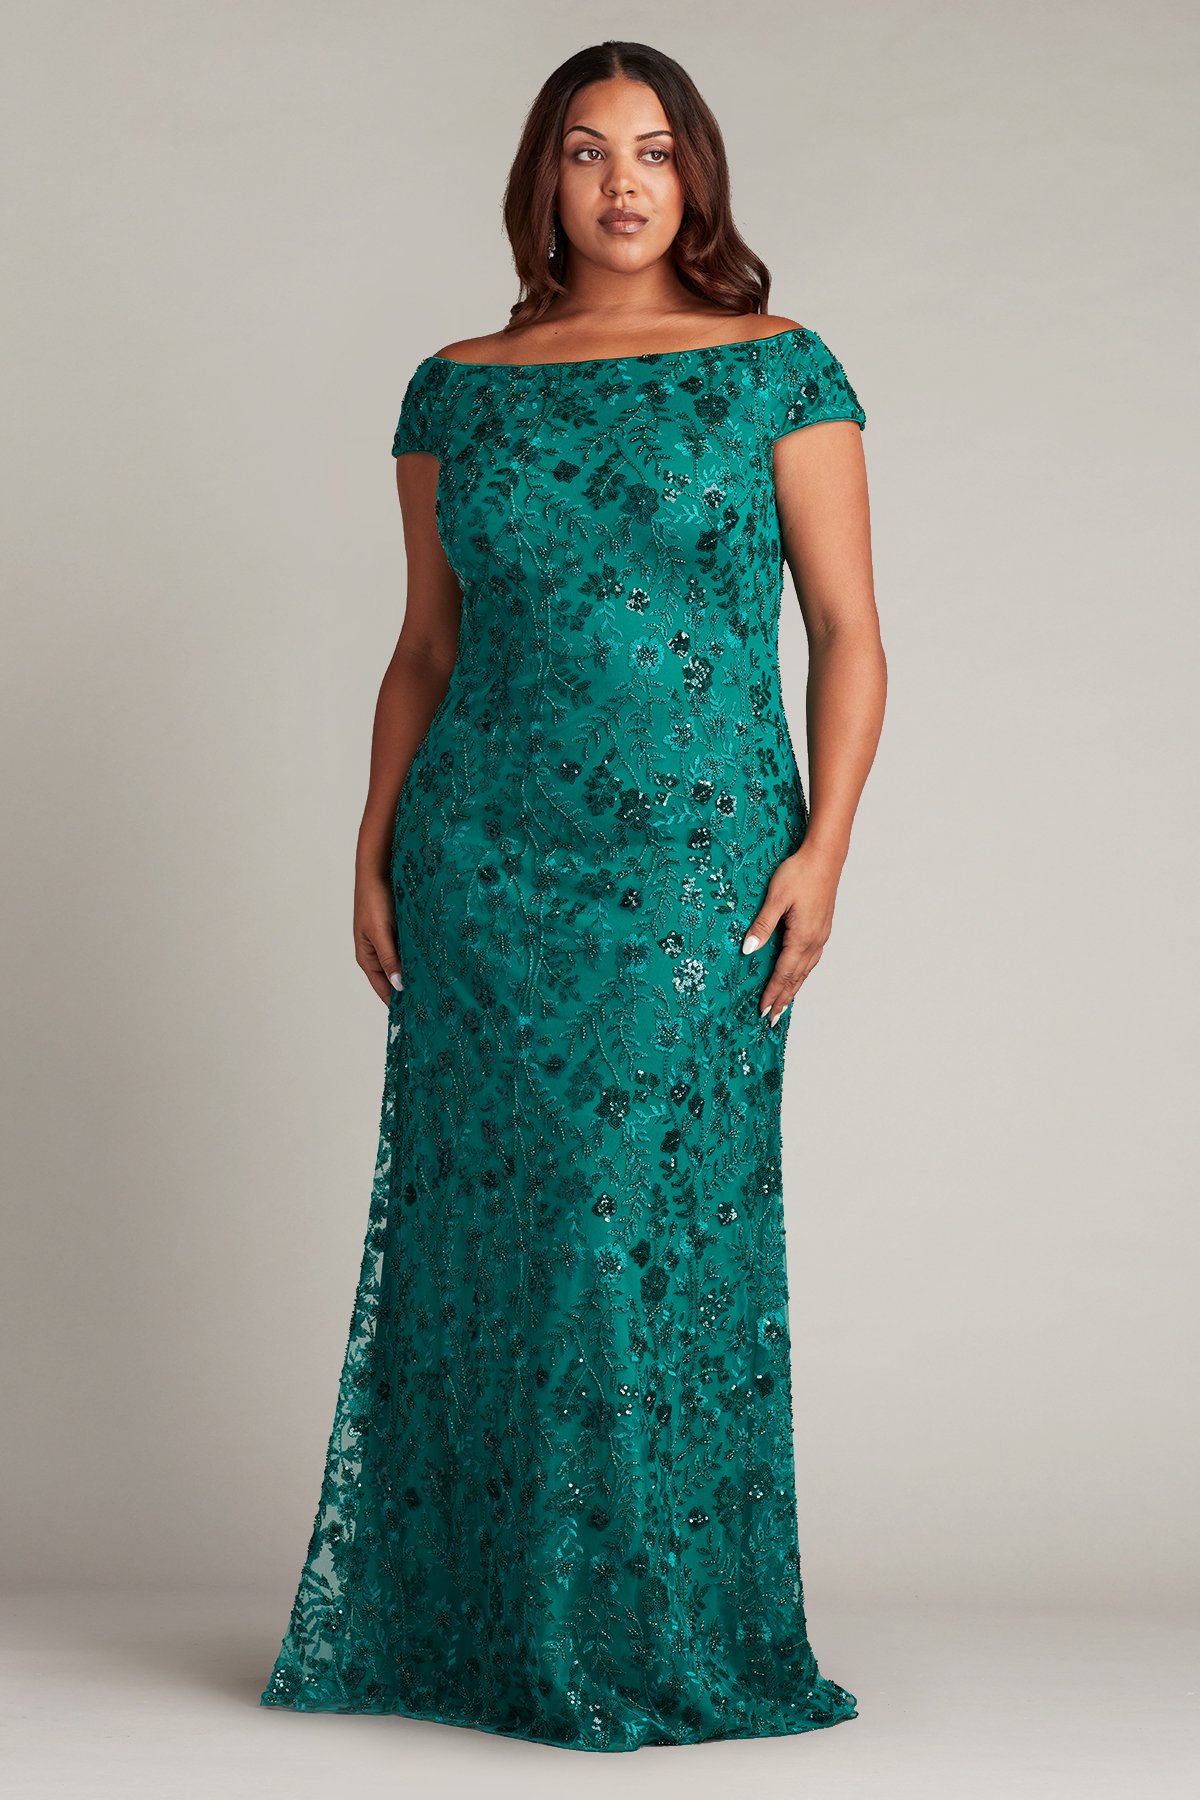 Kiyonna Plus Size Isabella Embroidered Mesh Formal Gown - Macy's